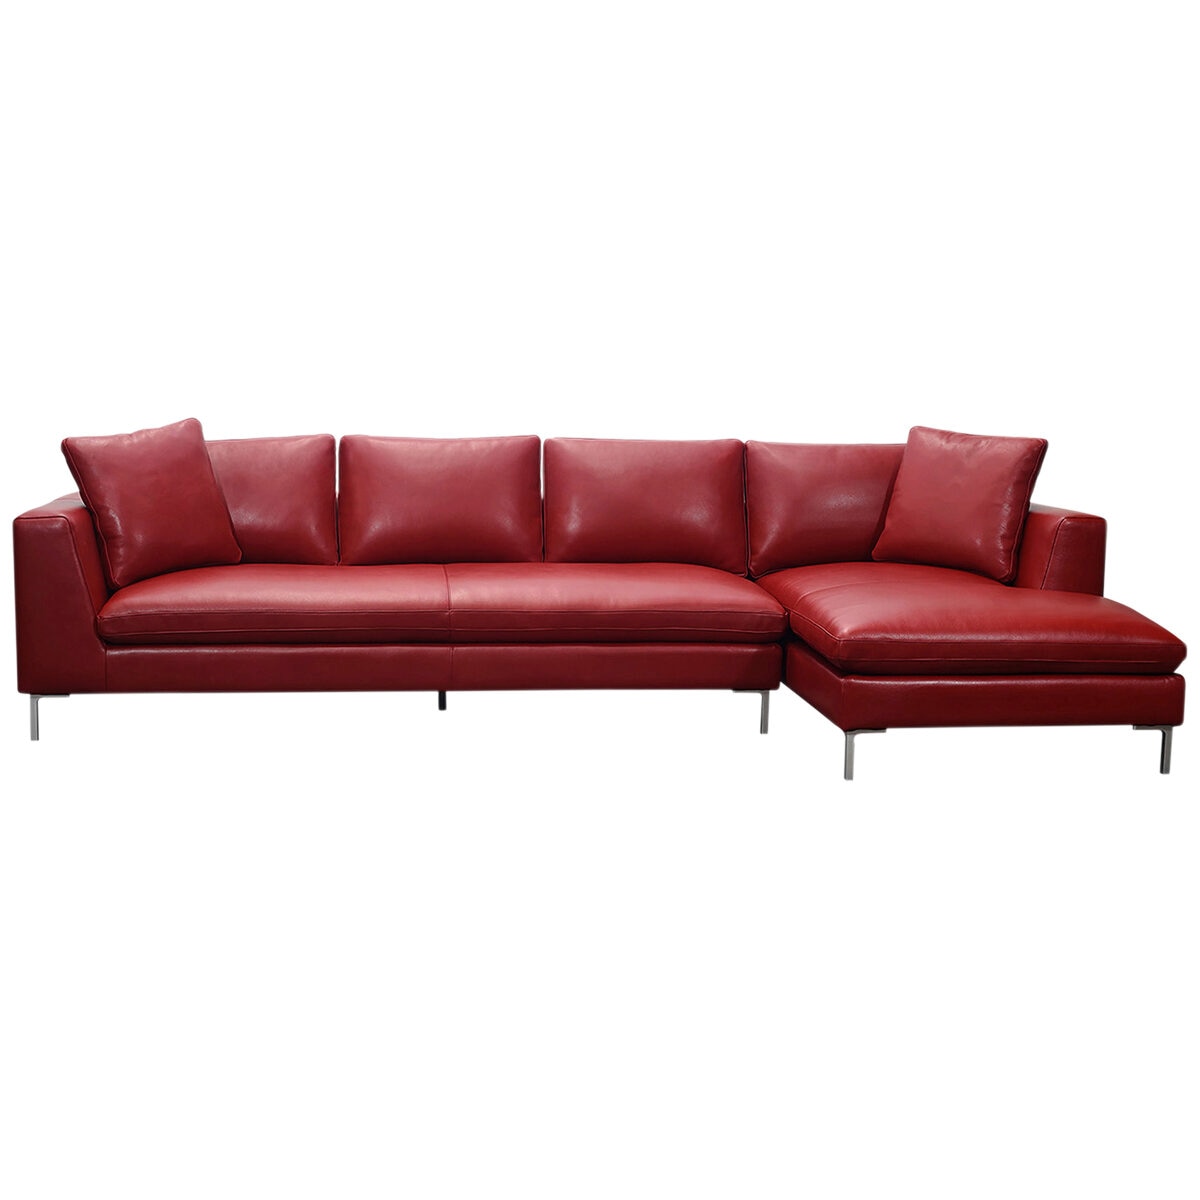 Moran Pico 3.5 Seater Sofa with Right Chaise